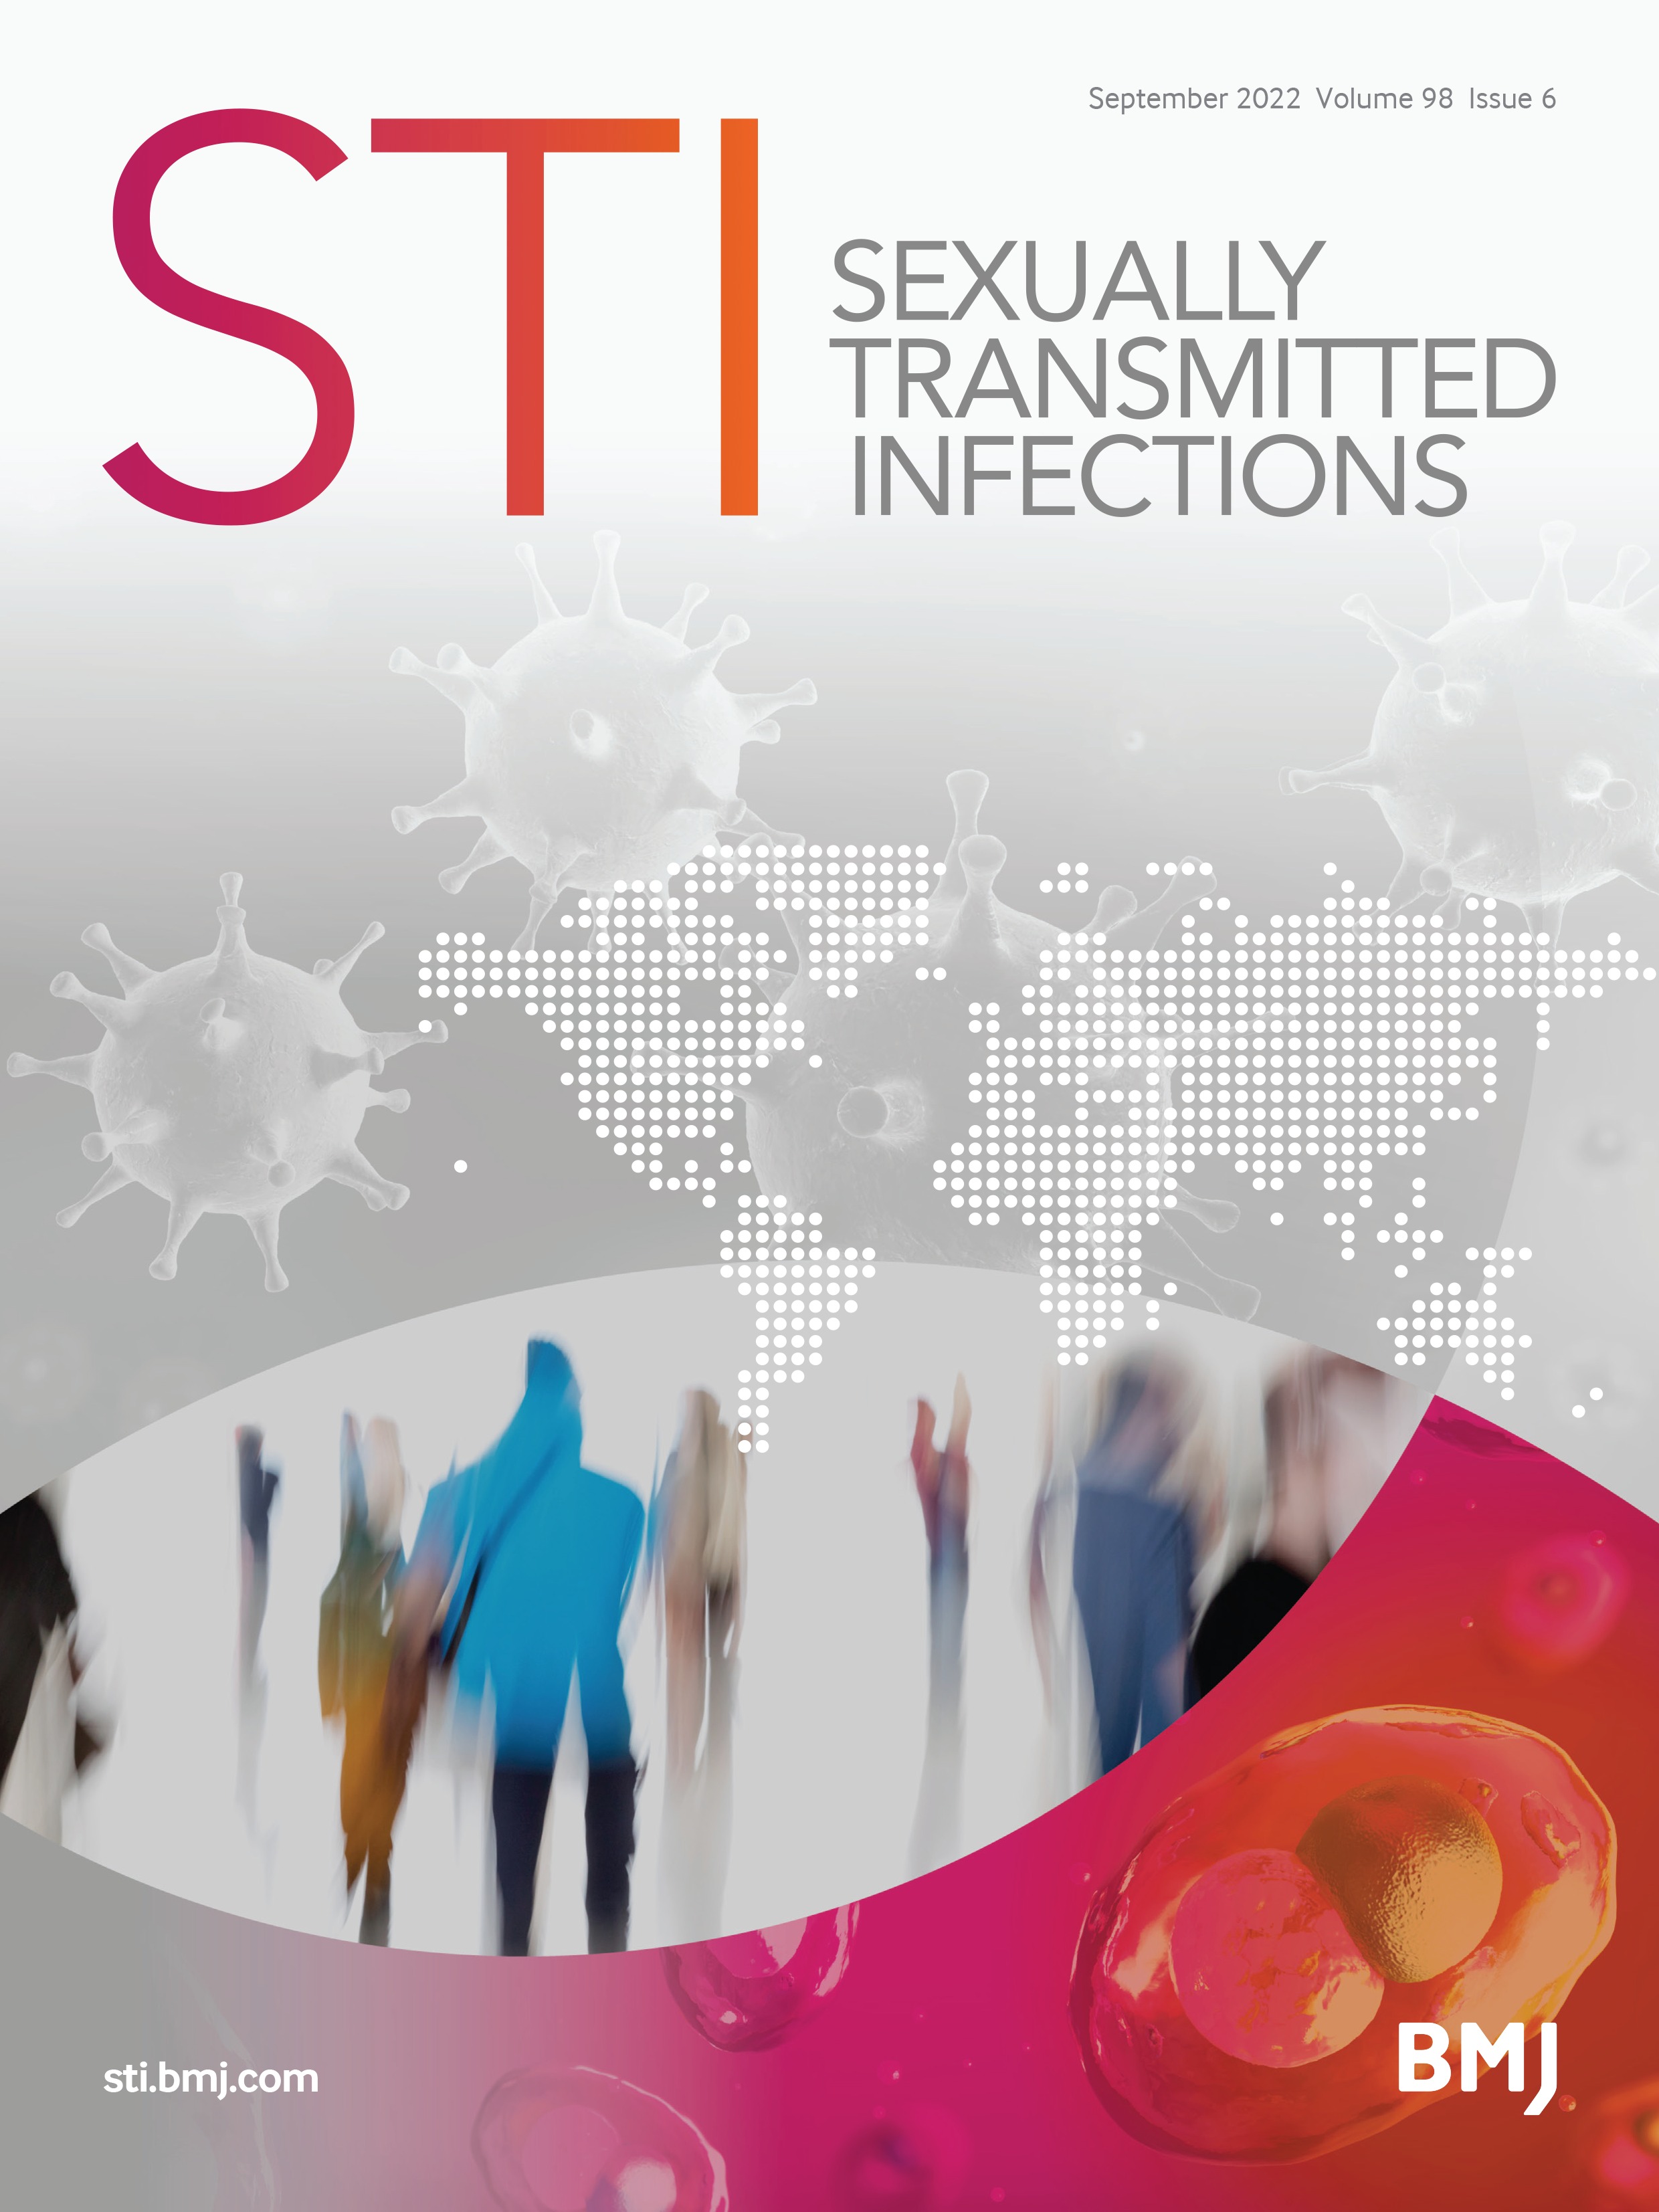 Quantifying heterogeneity in sexual behaviour and distribution of STIs before and after pre-exposure prophylaxis among men who have sex with men